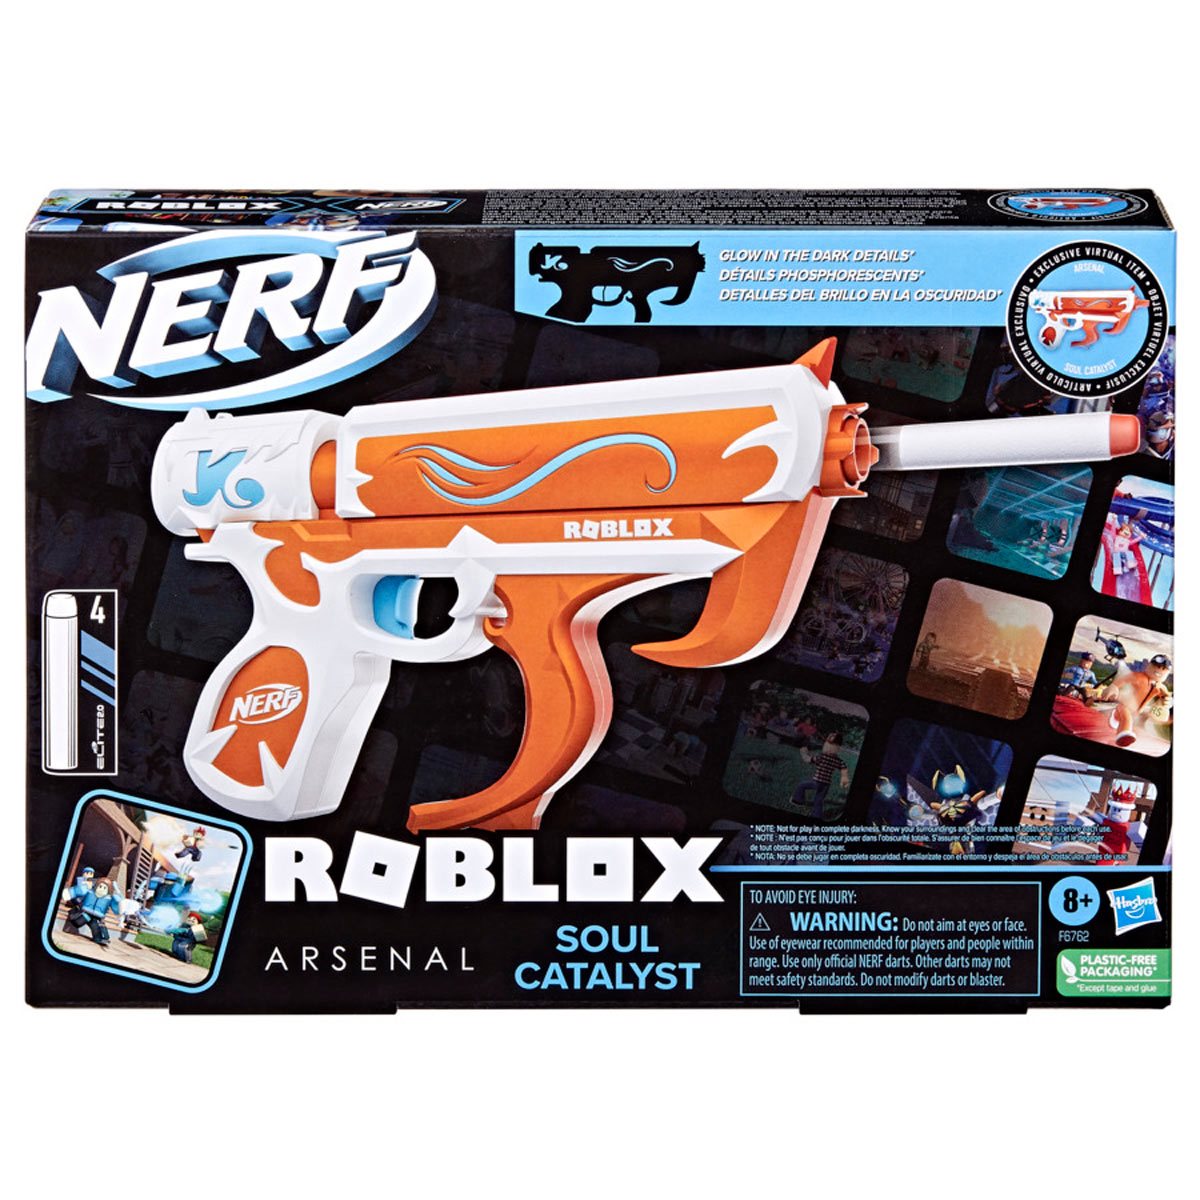 Nerf Roblox Arsenal Pulse Laser and Adopt Me! Bees! Blasters